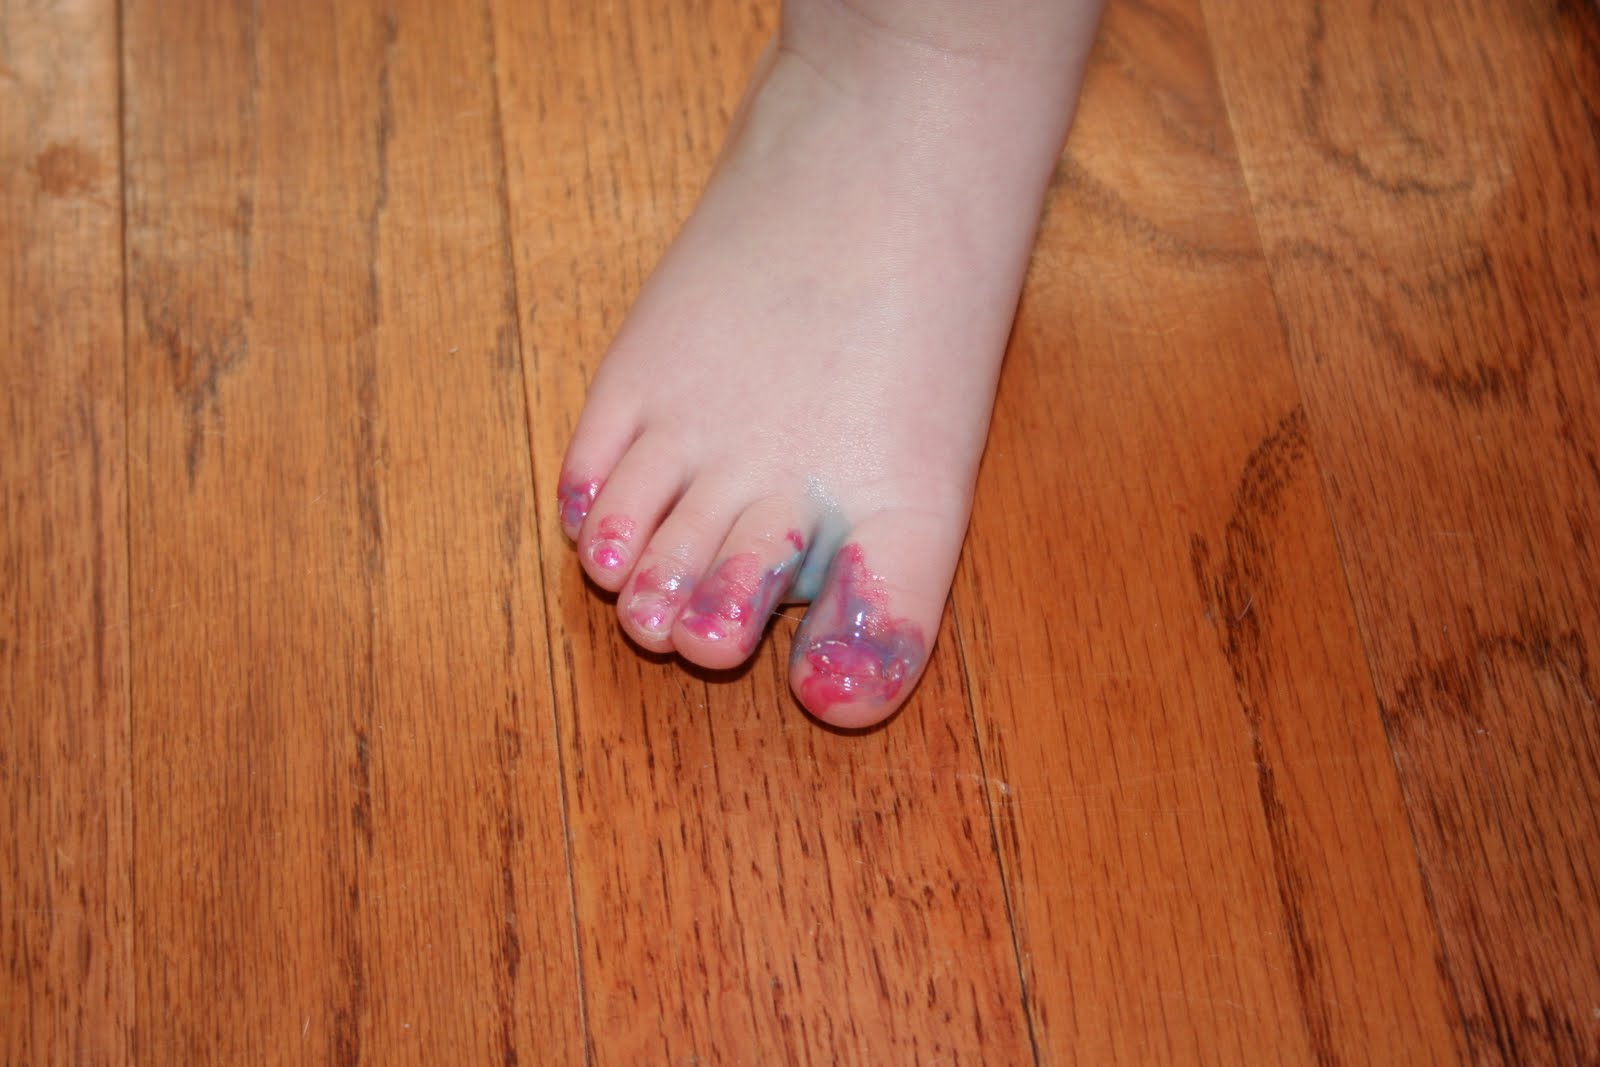 A Day In The Life Of A Lackey Painted Toes And Feet And Floor